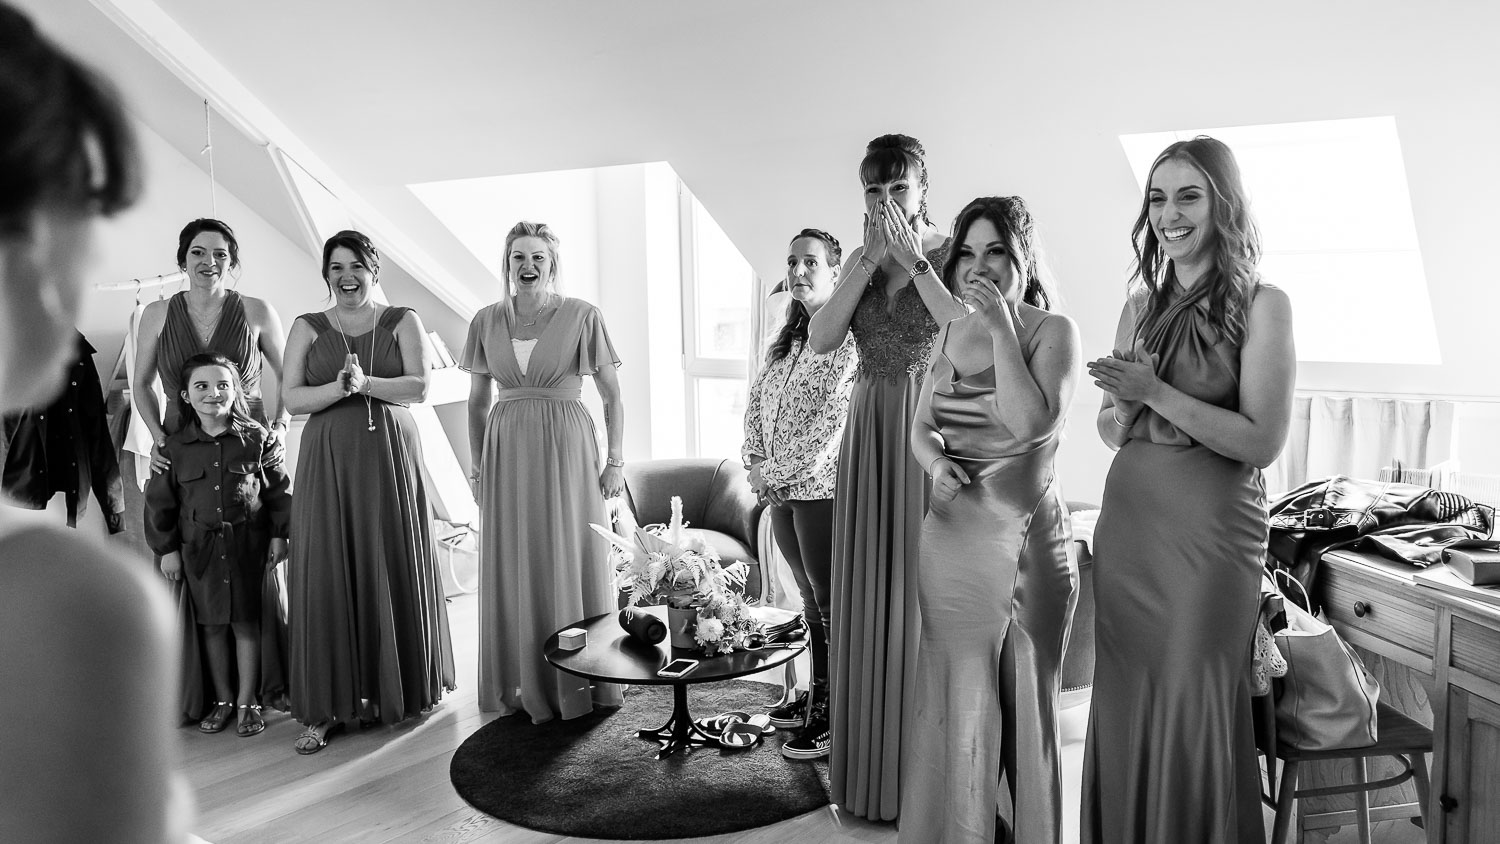 Bridal party Brussels,Belgium - First look for bridesmaids